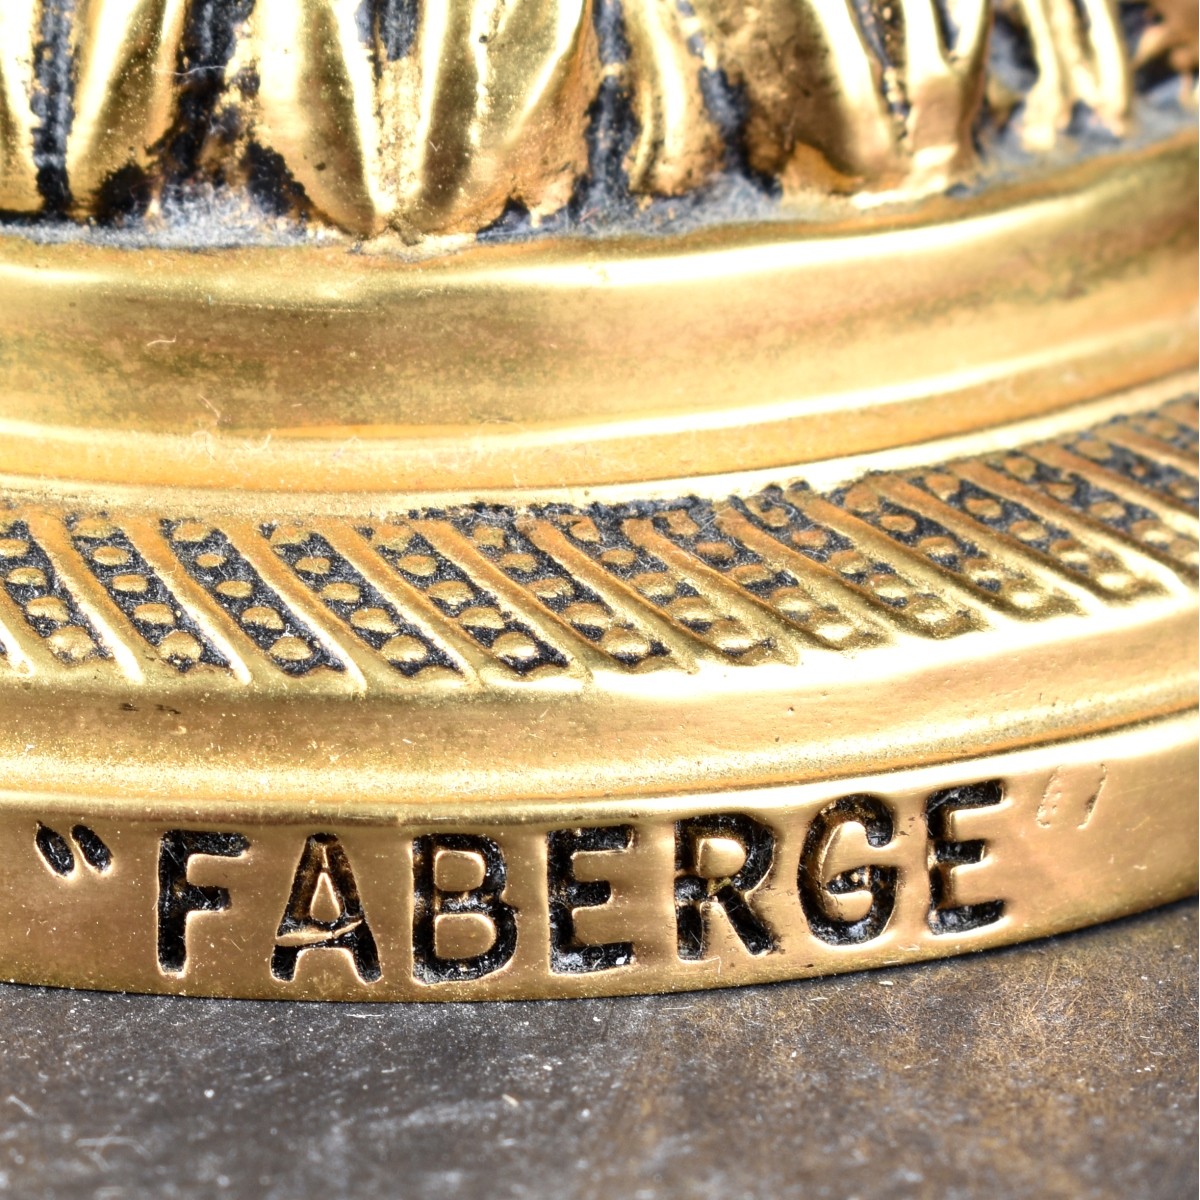 Two Faberge Cut to Clear Eggs